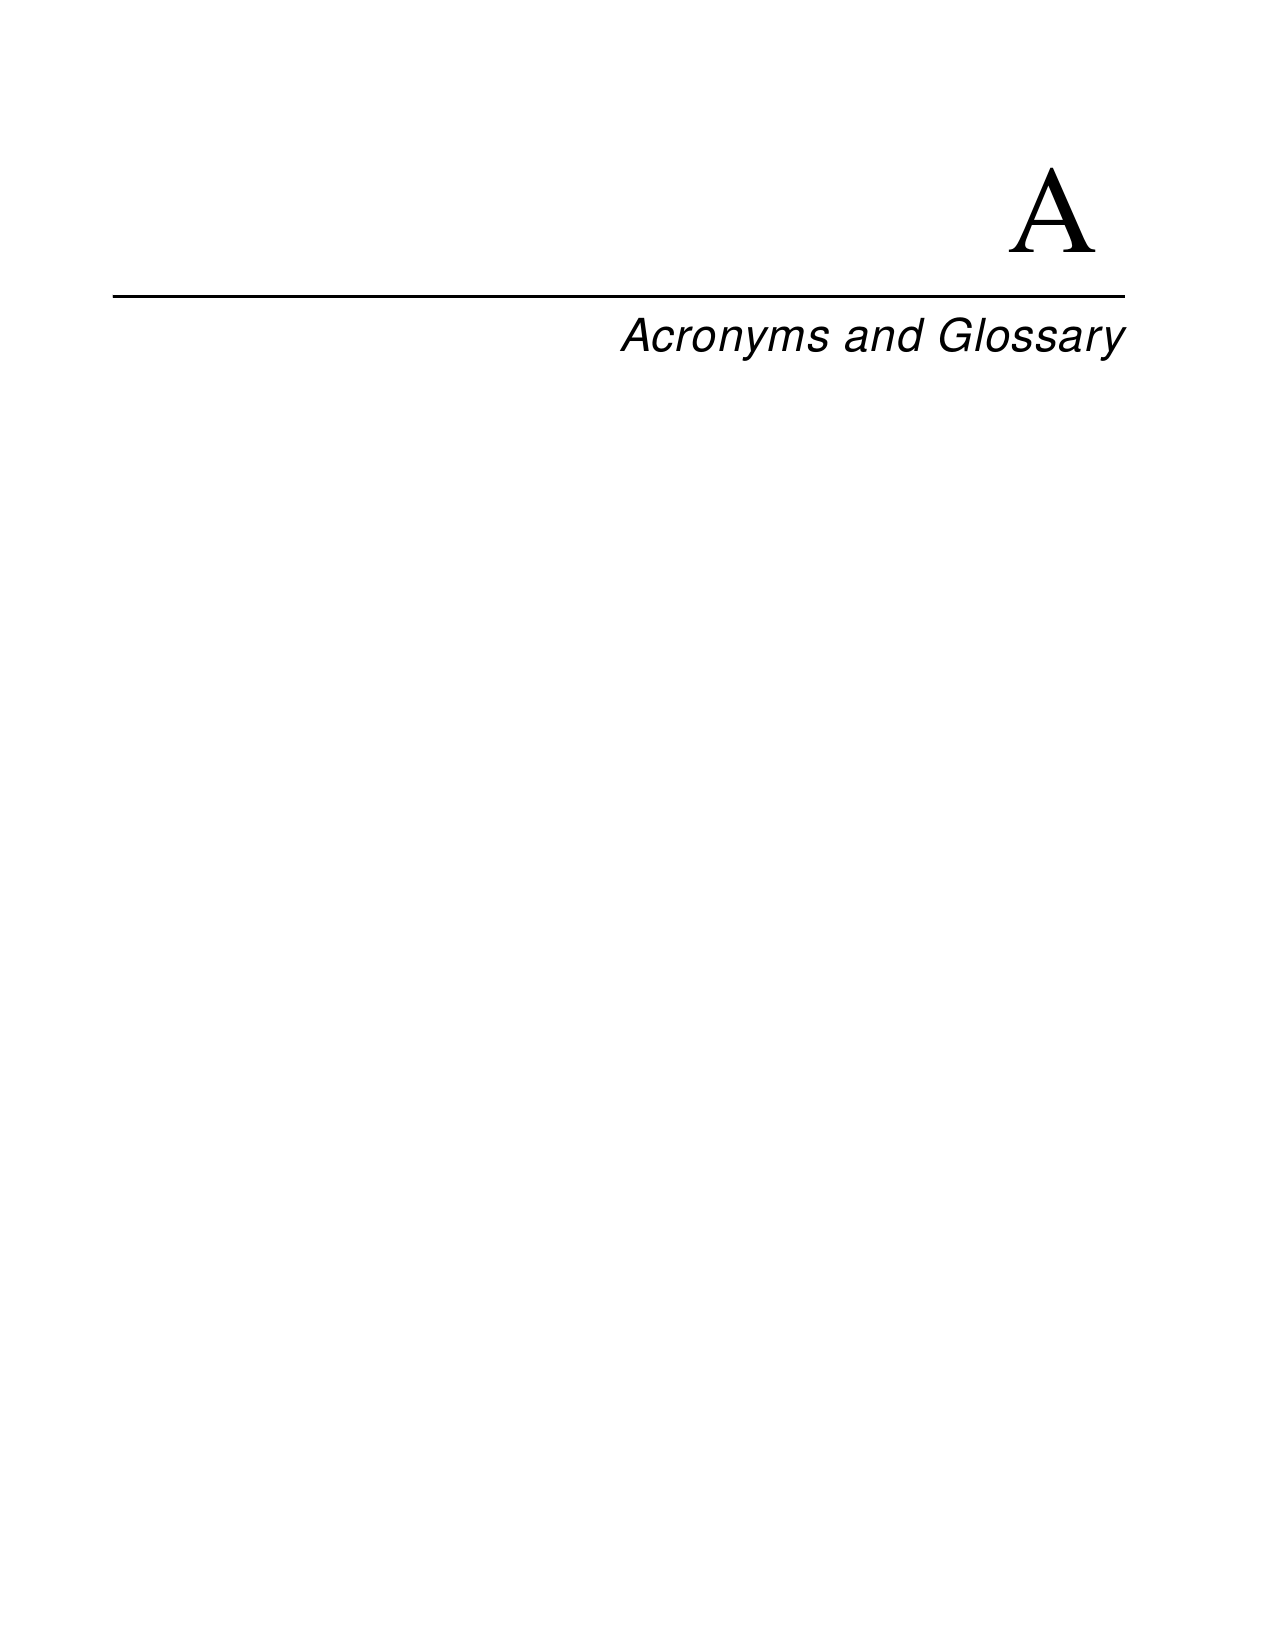 AAcronyms and Glossary